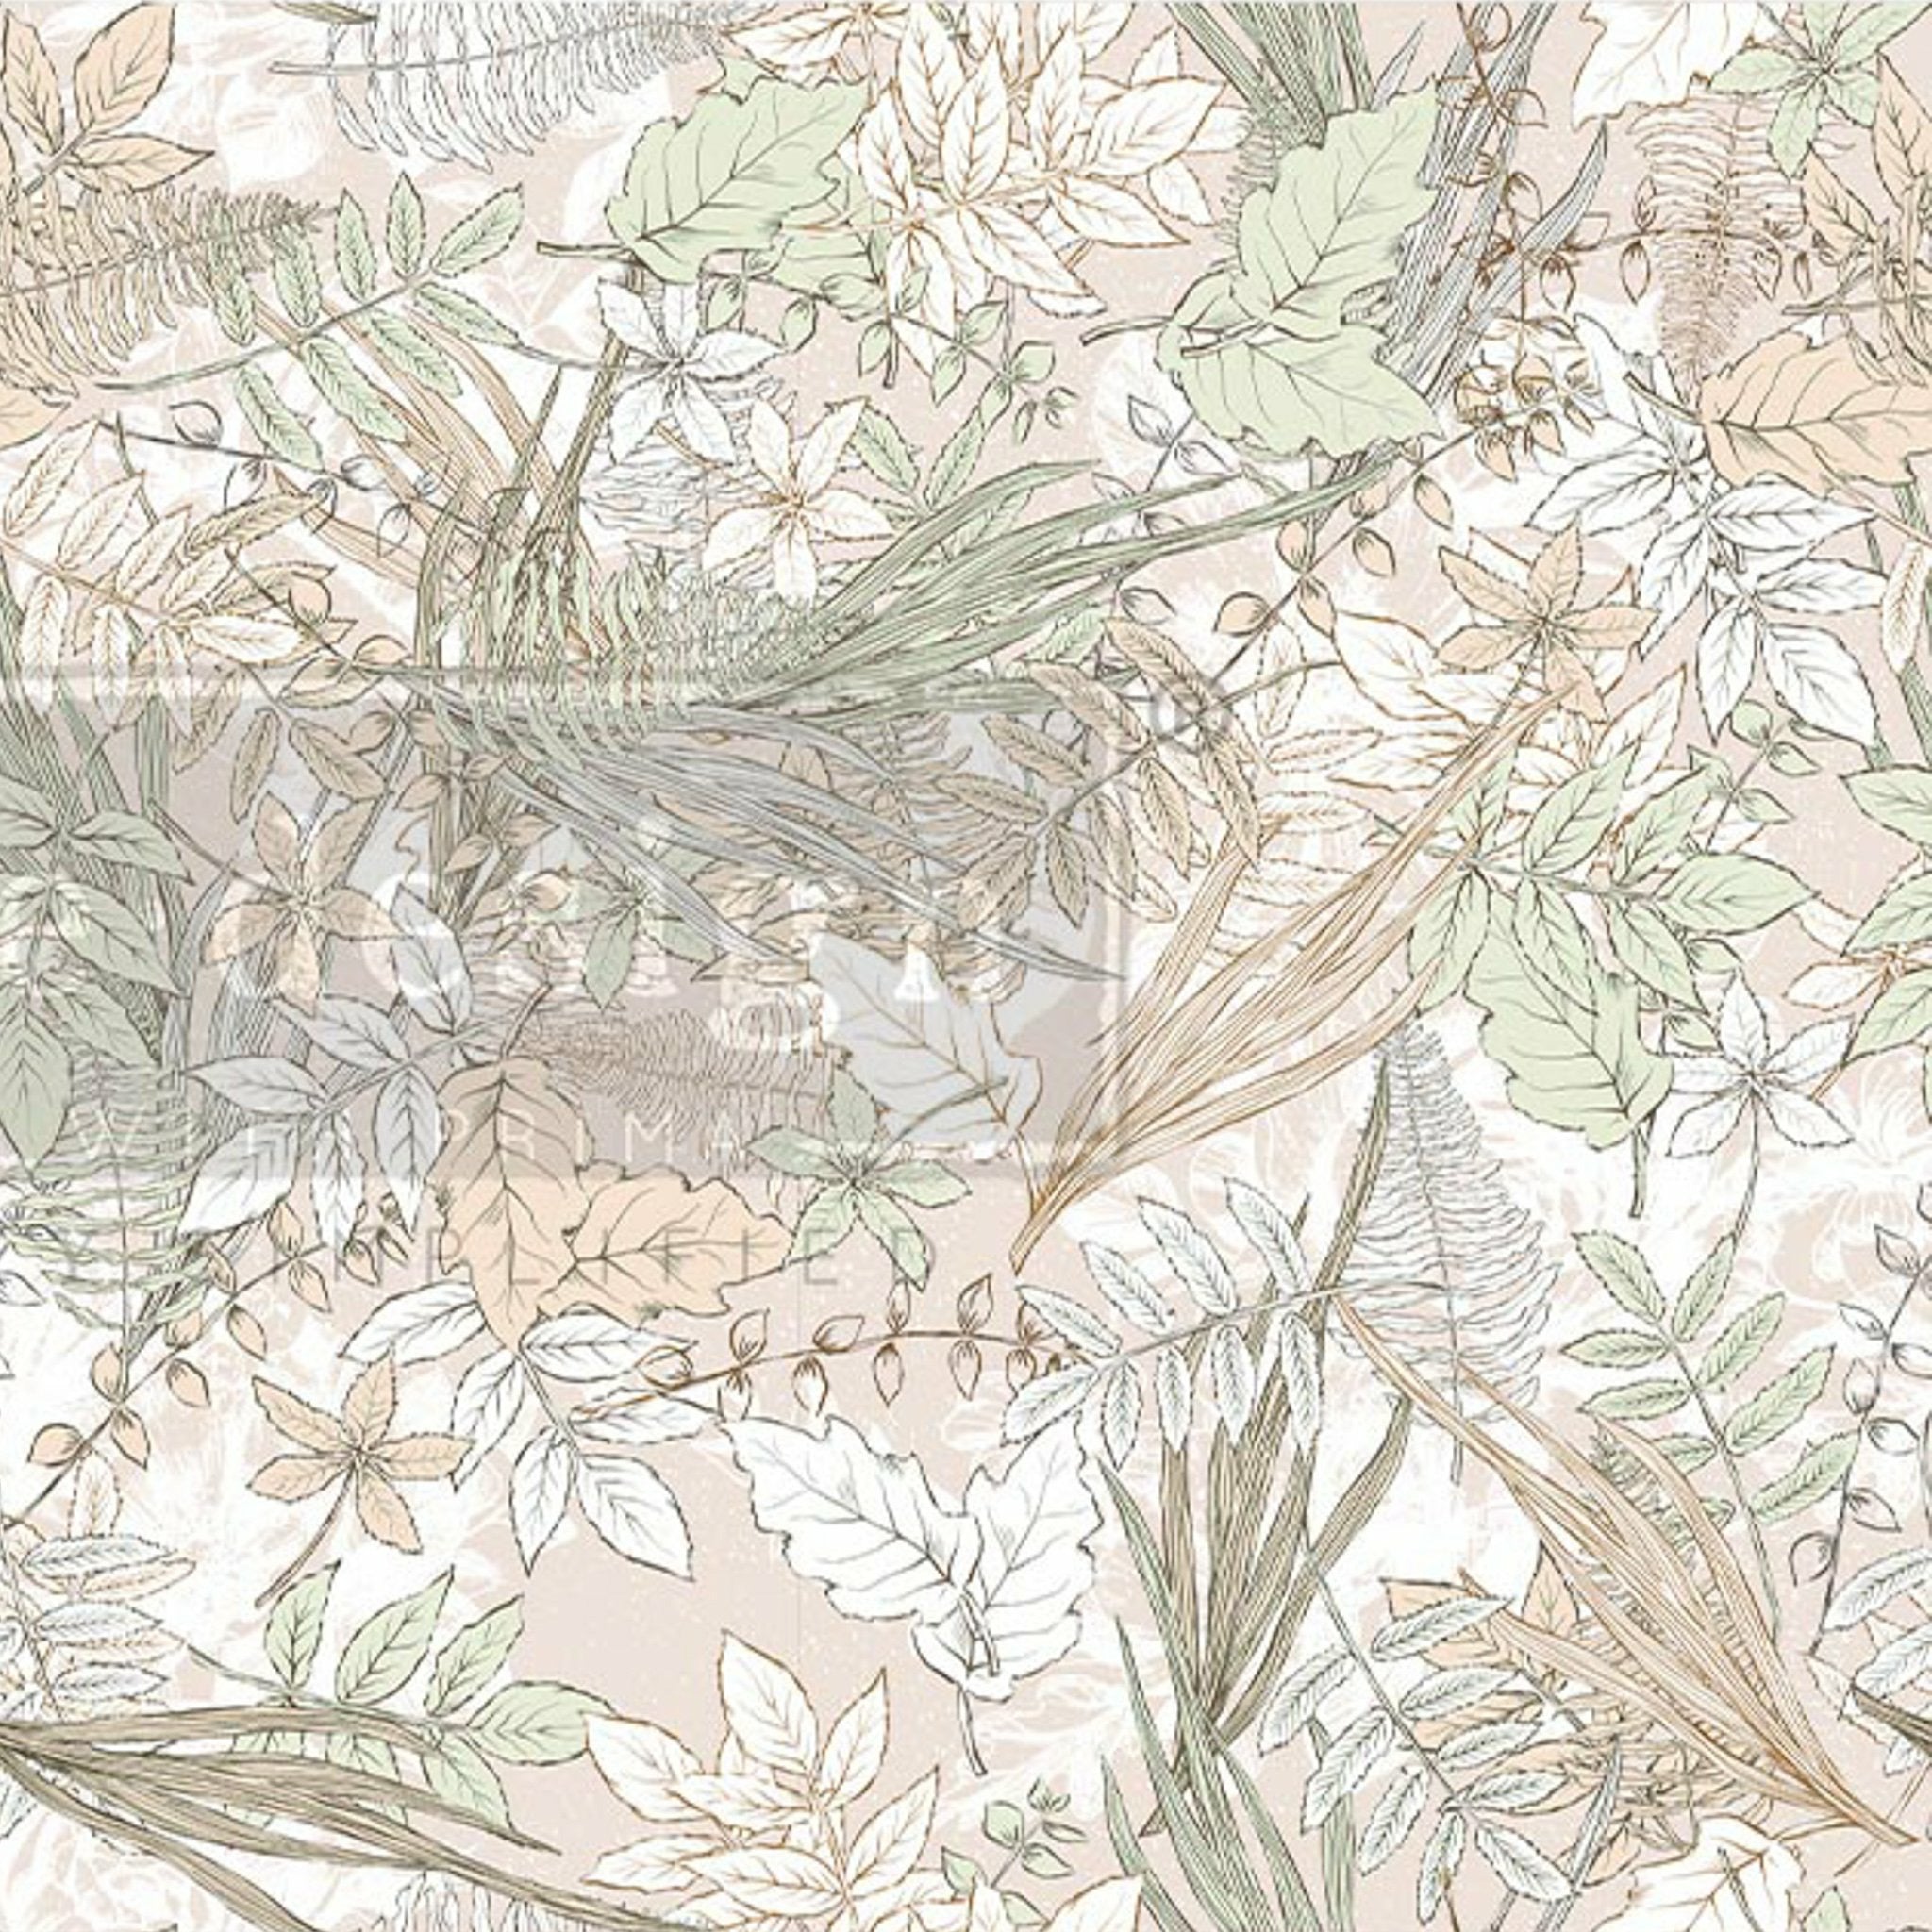 A close up crop of a muted watercolor style green and tan leaves tissue paper design. A transparent redesign logo is placed on top.